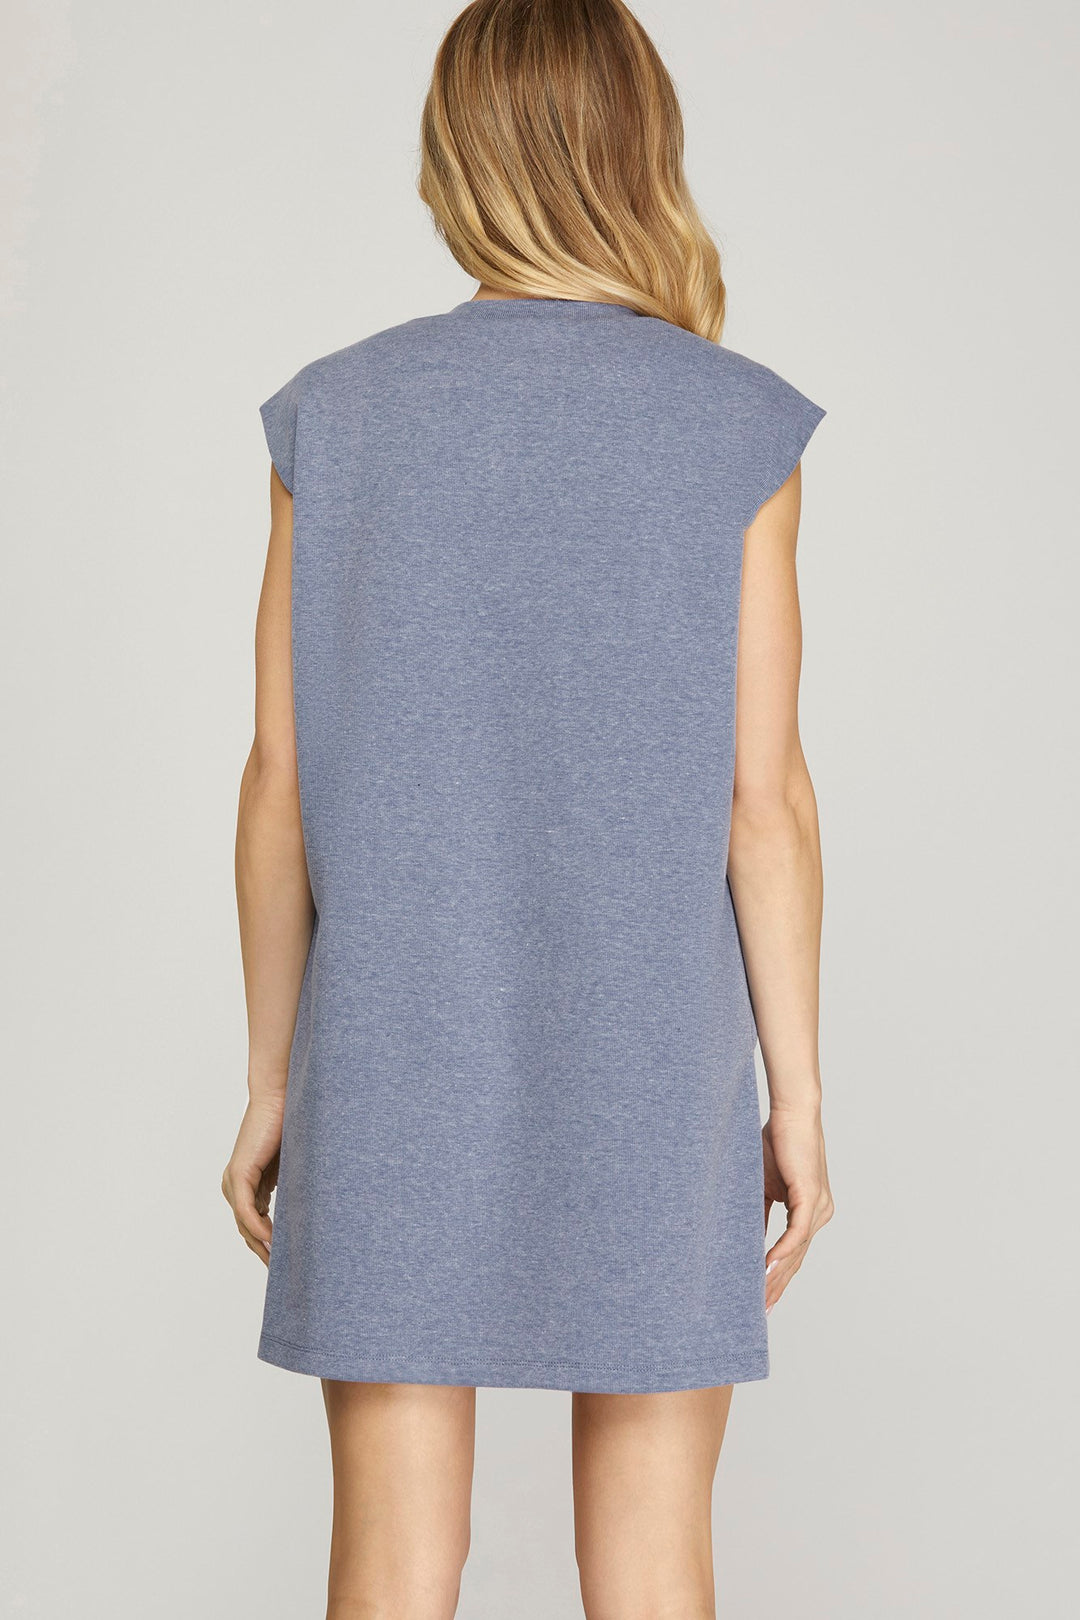 Everyday Bliss Sweater Dress in Blue